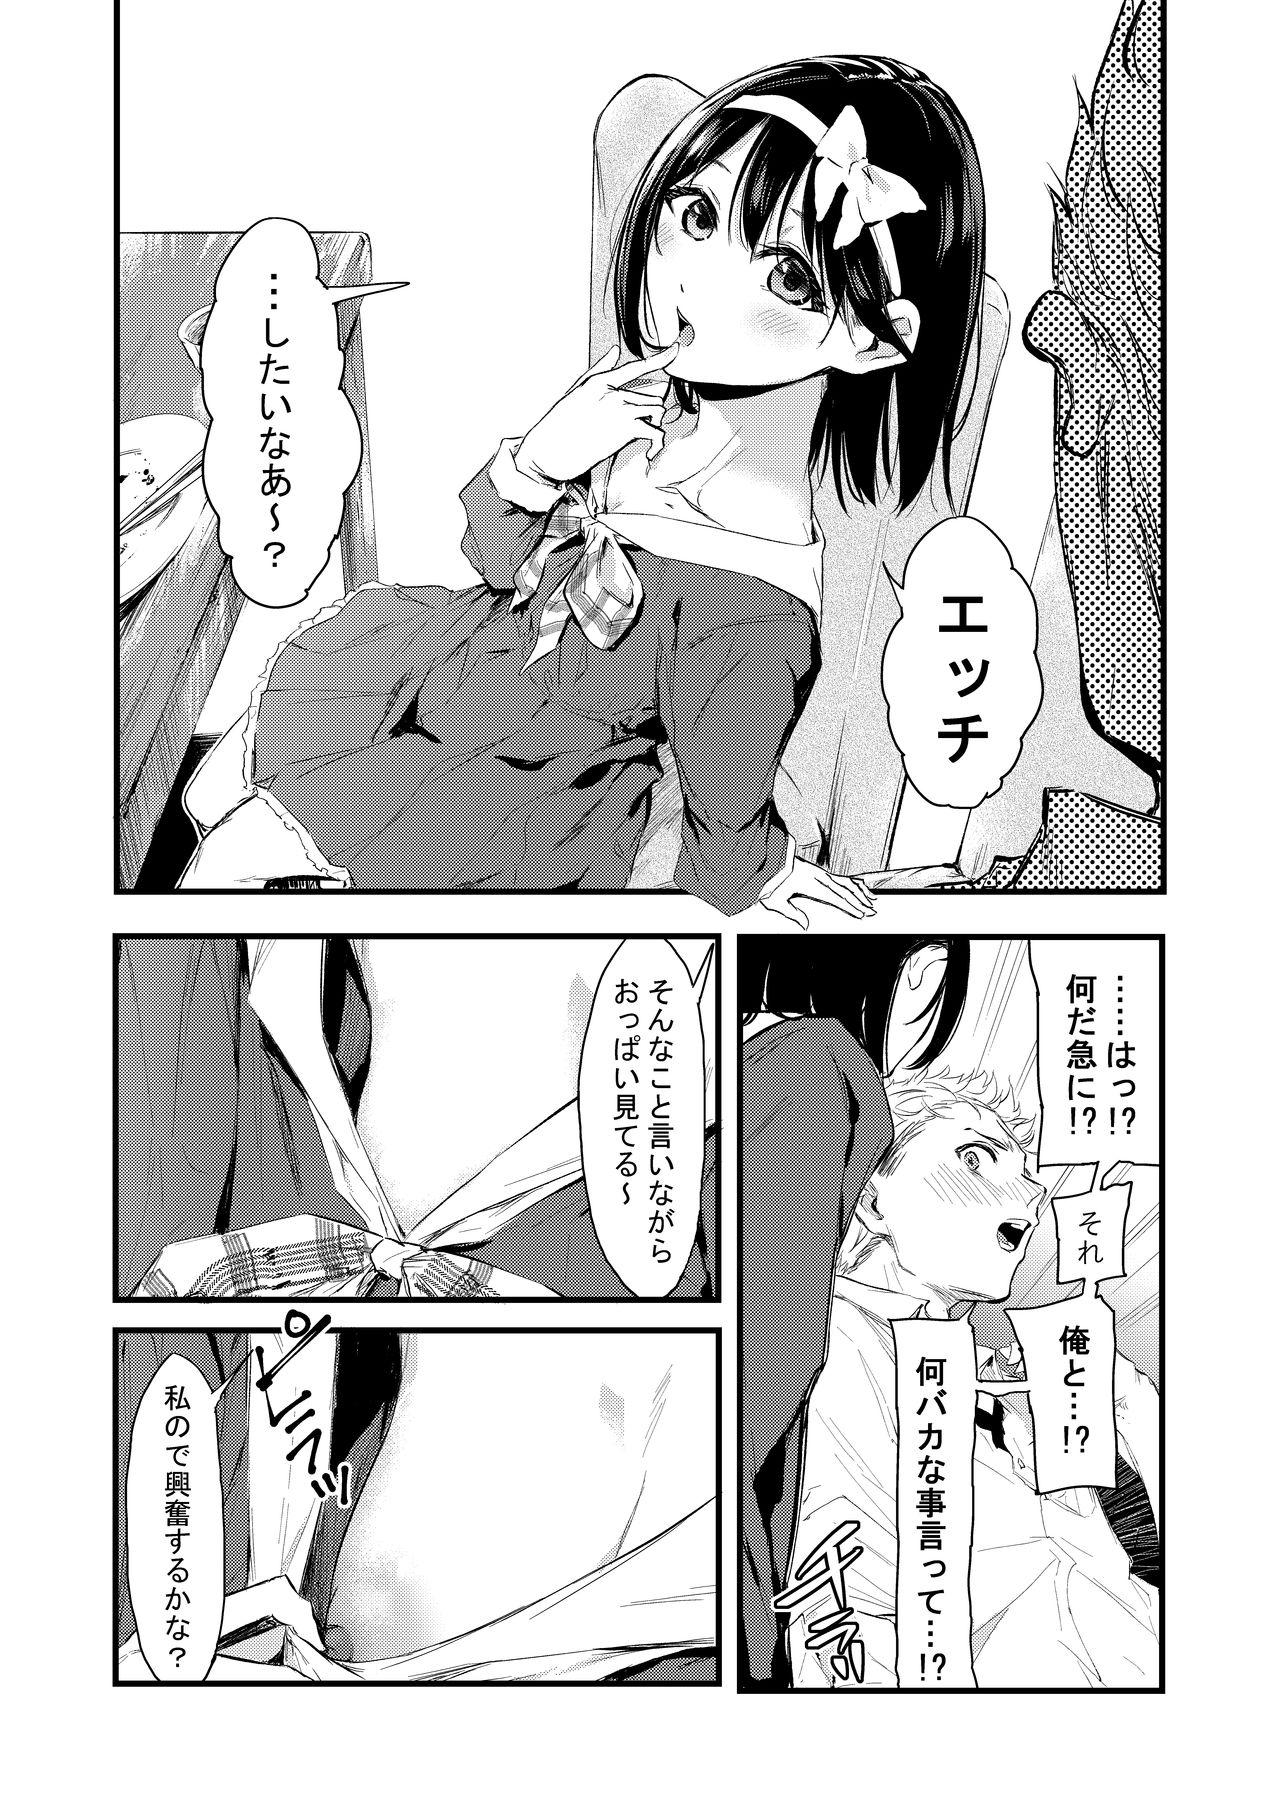 Piercing 気づいたら兄のが挿入ってた Gay Longhair - Page 10